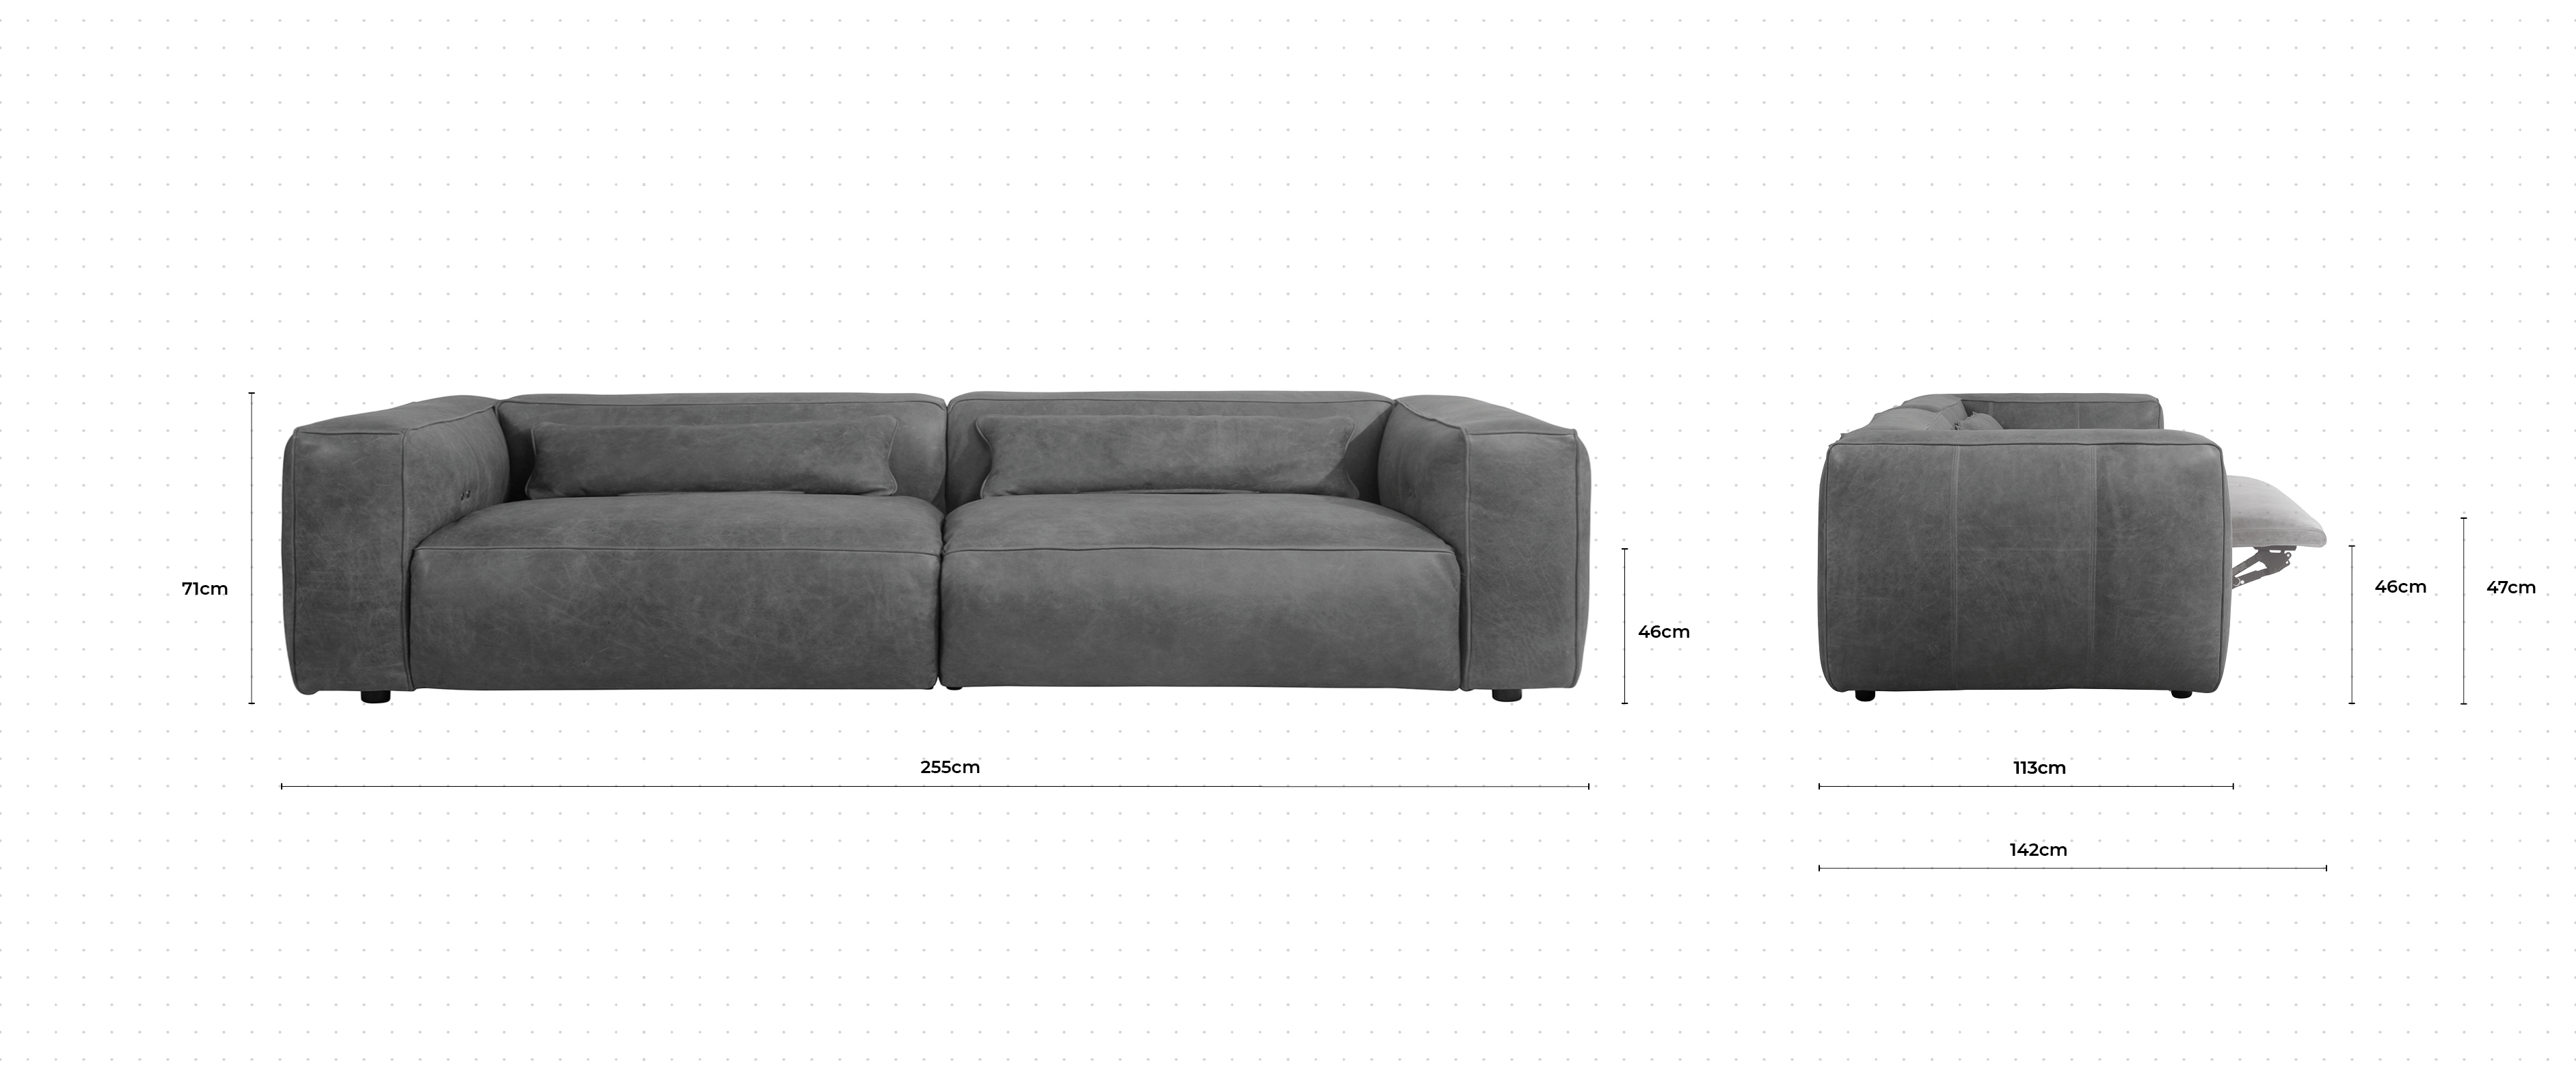 Ford 3 Seater Sofa dimensions